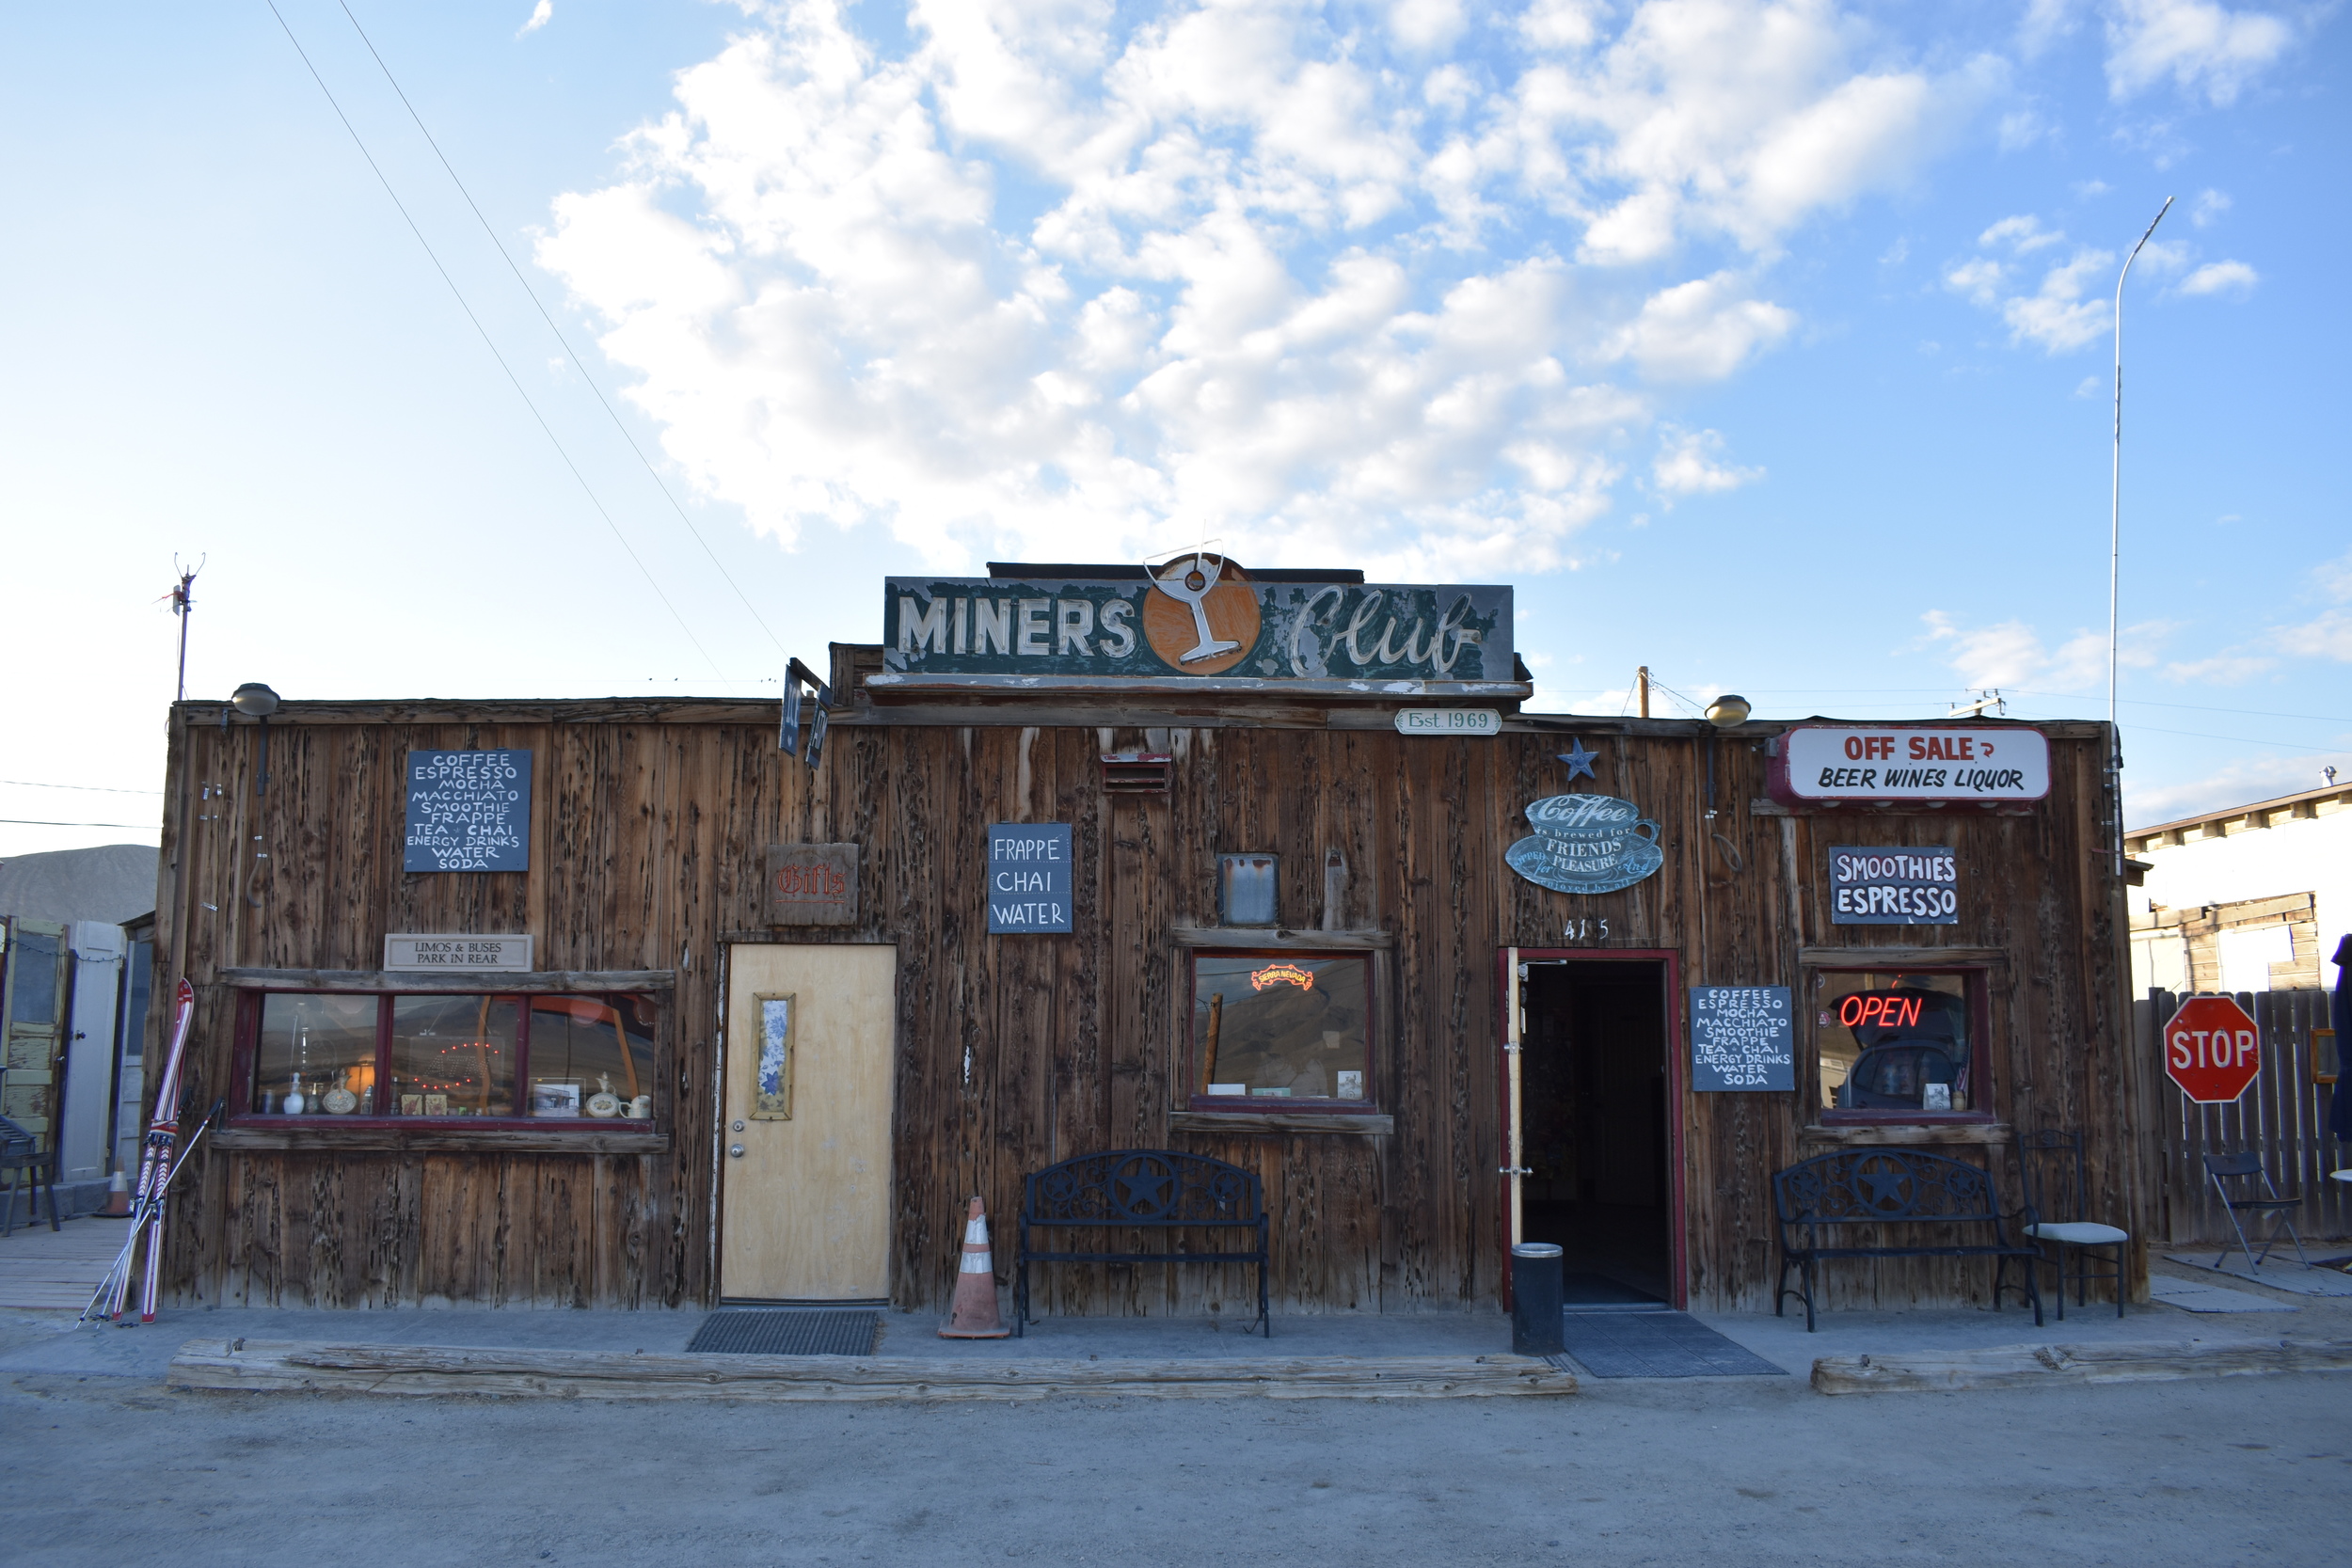 Miners Club wall and roof mounted signs, Gerlach, Nevada